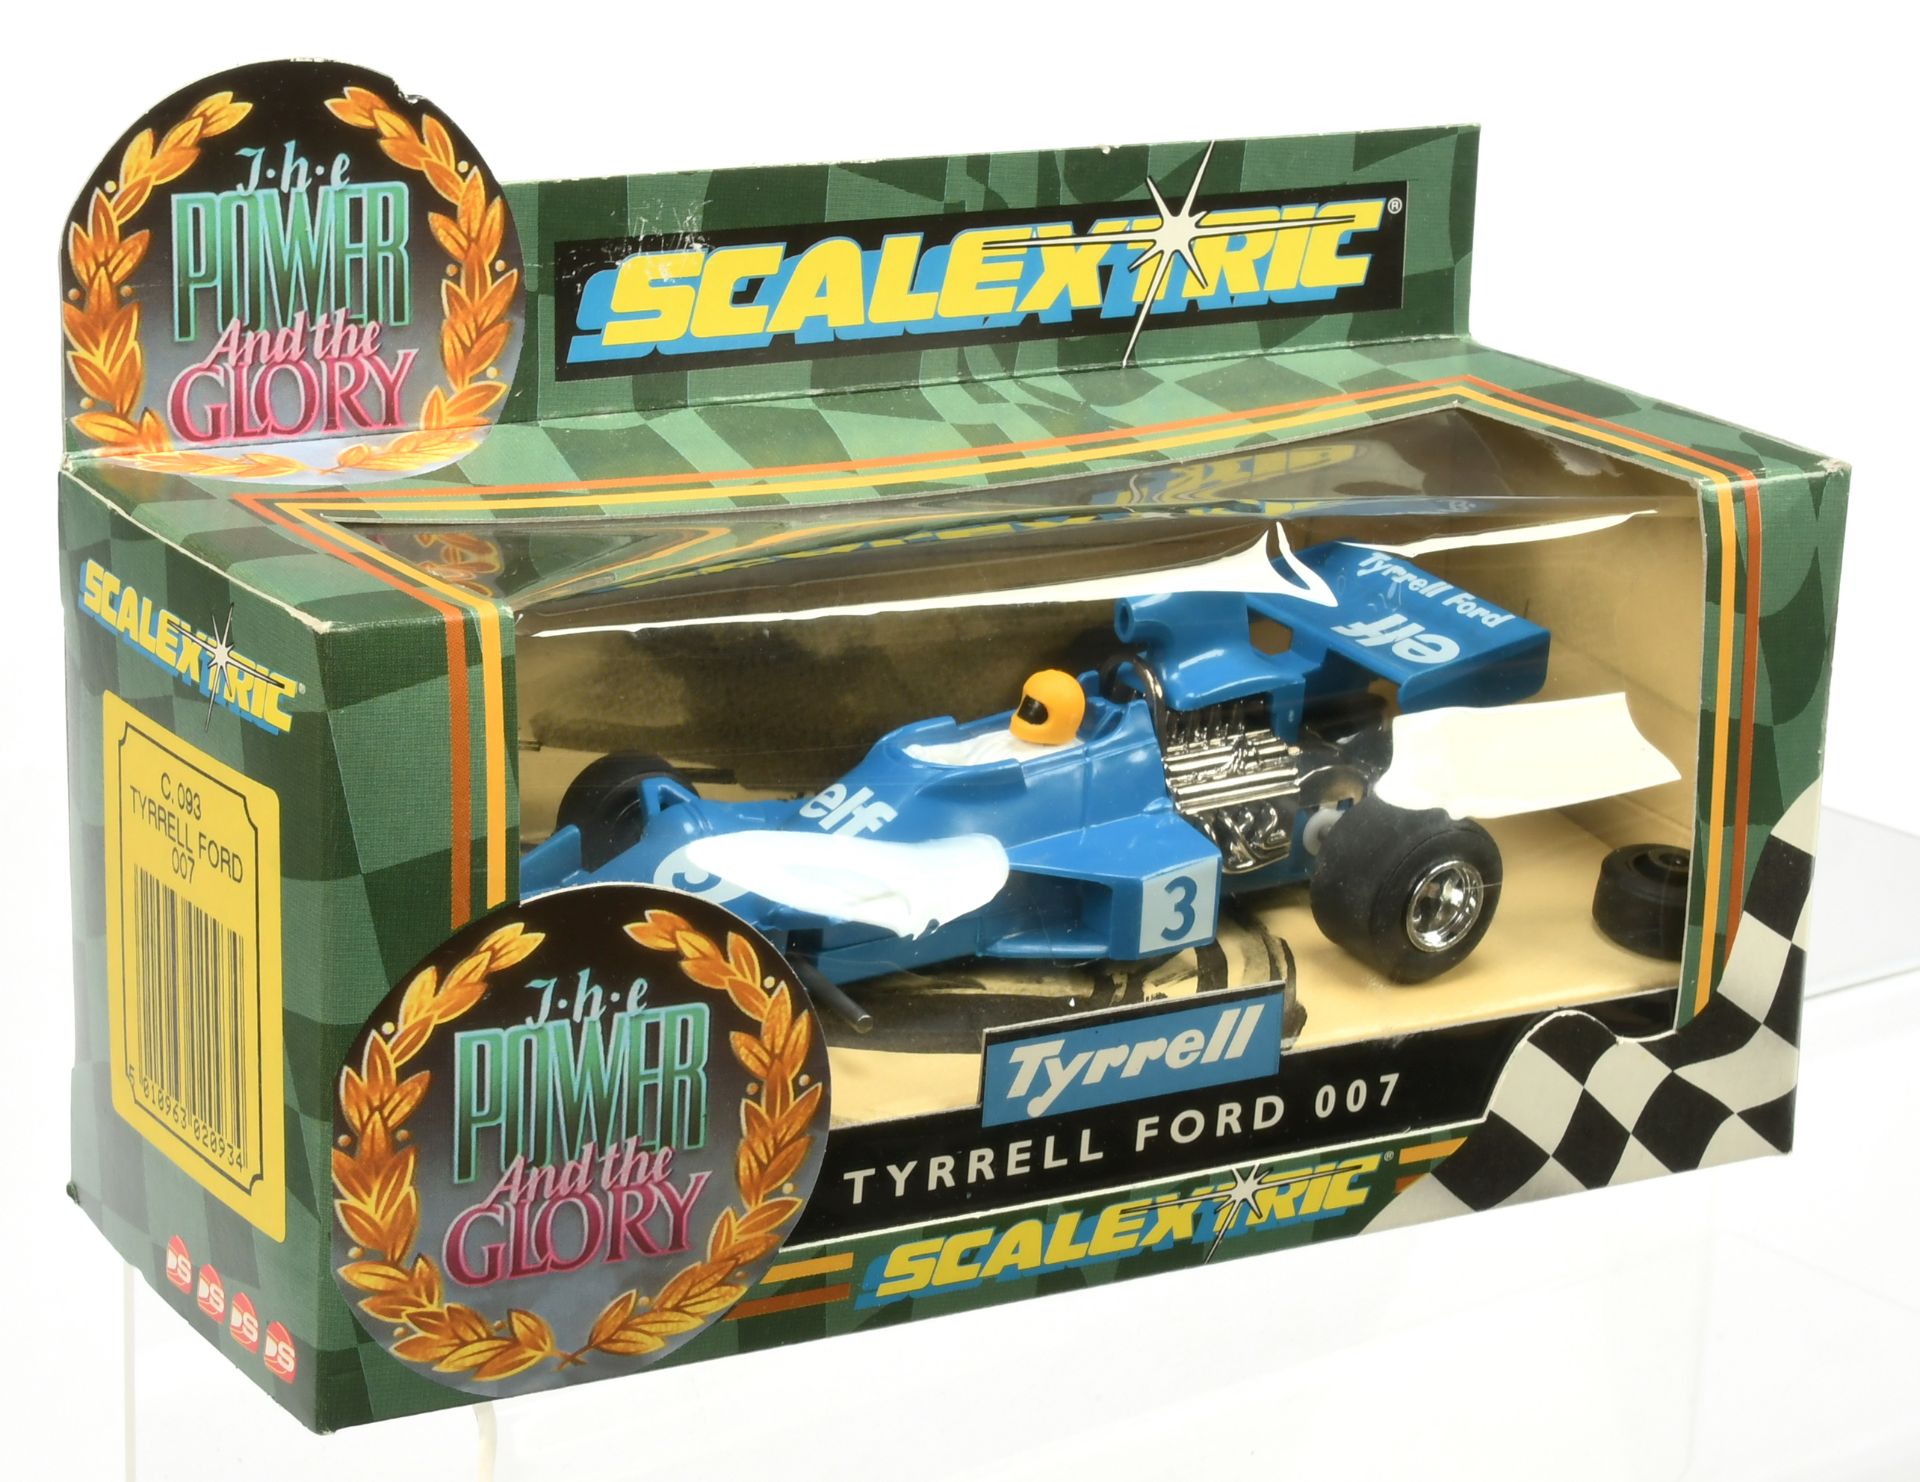 Scalextric The Power and the Glory, Tyrrell Ford 007, C 093 Tyrrell Ford 007